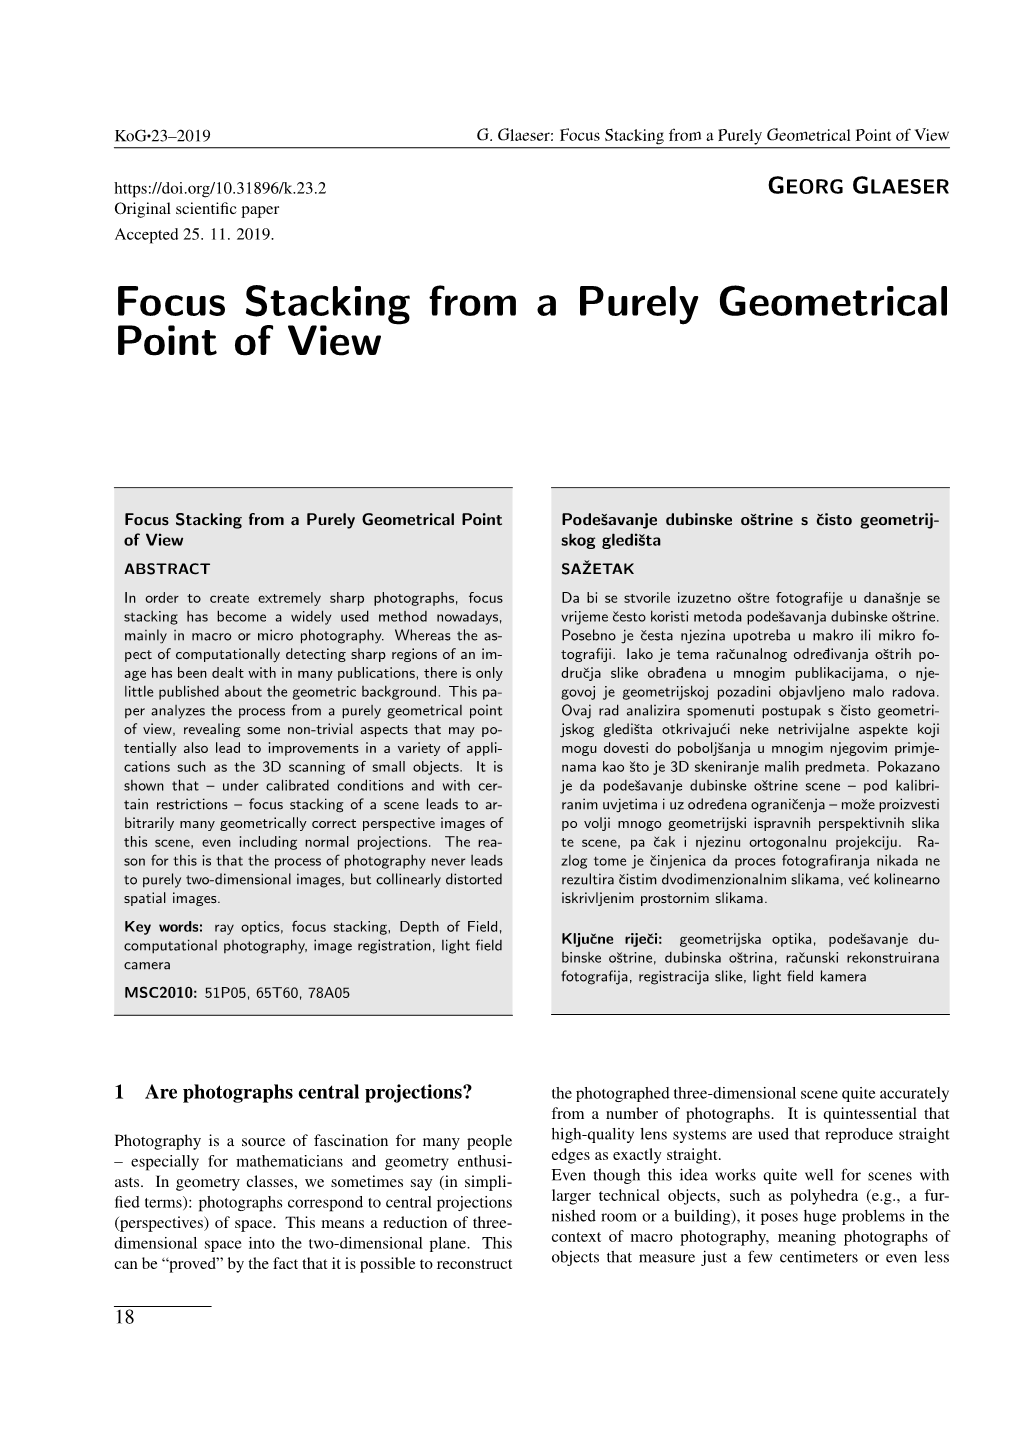 Focus Stacking from a Purely Geometrical Point of View GEORG GLAESER Original Scientiﬁc Paper Accepted 25